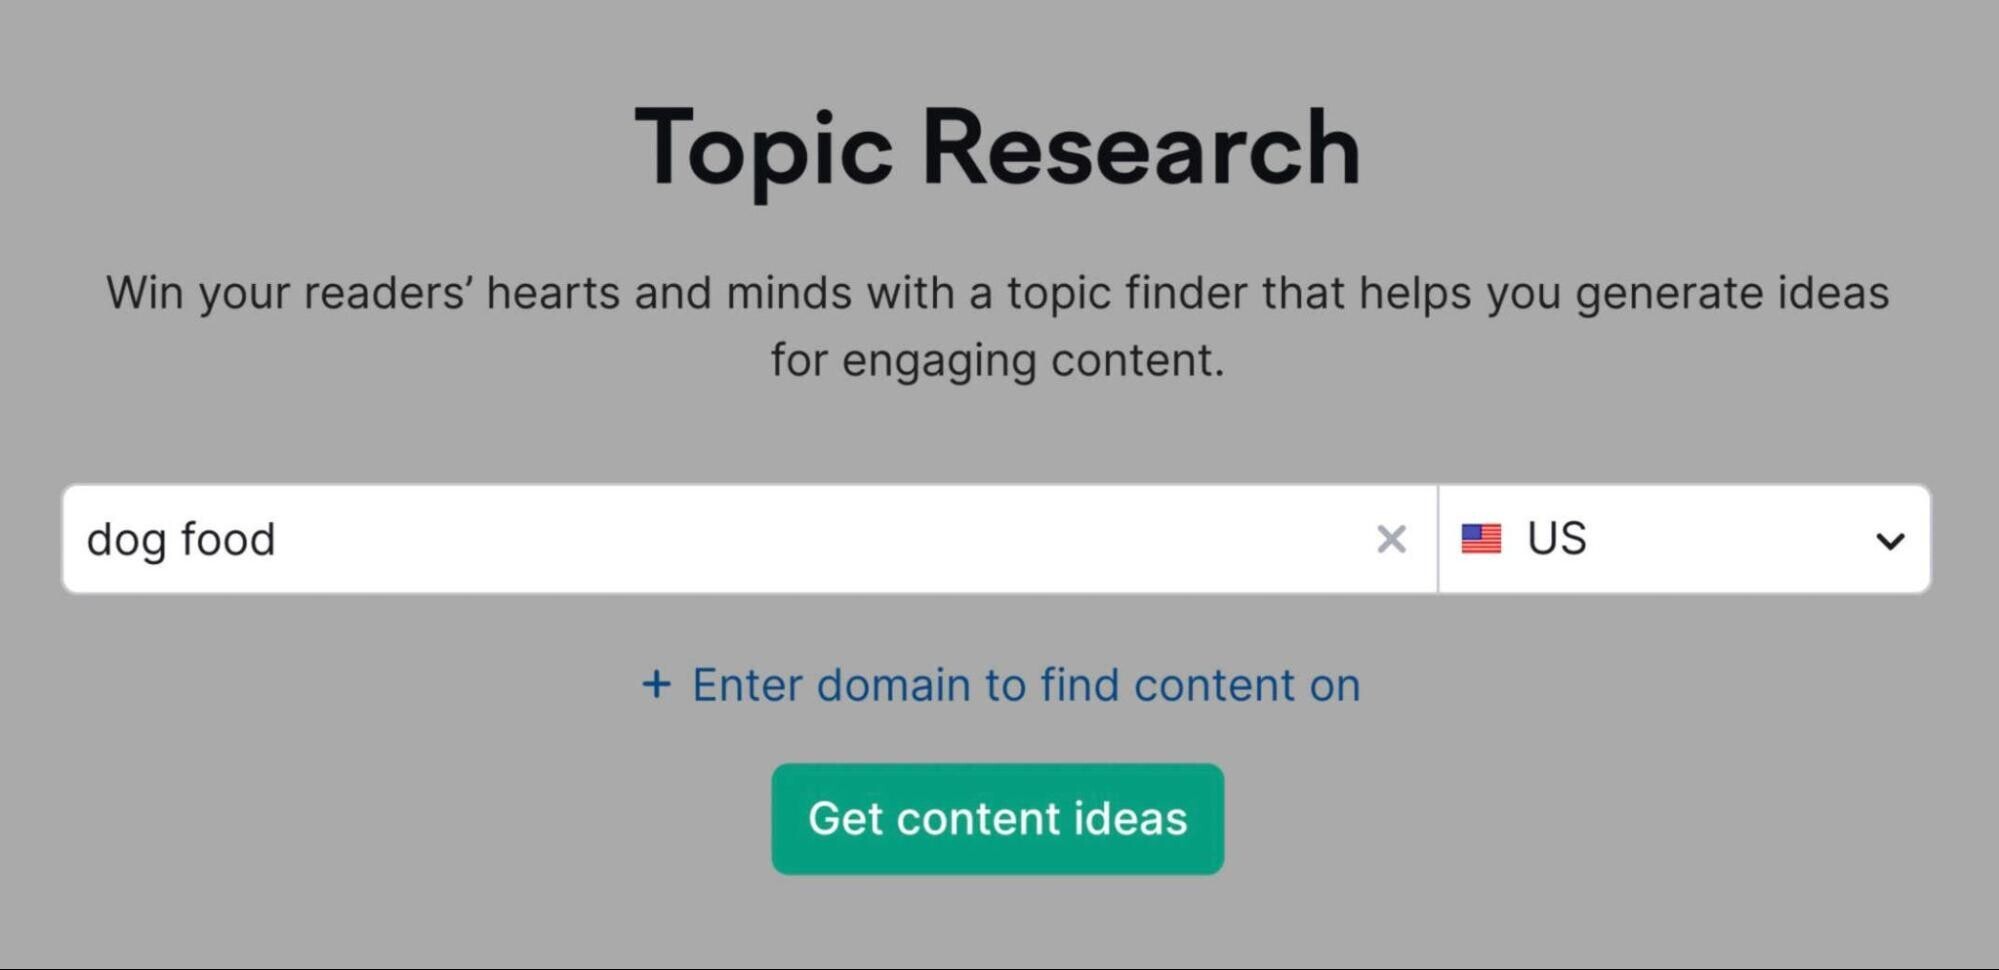 Topic Research tool